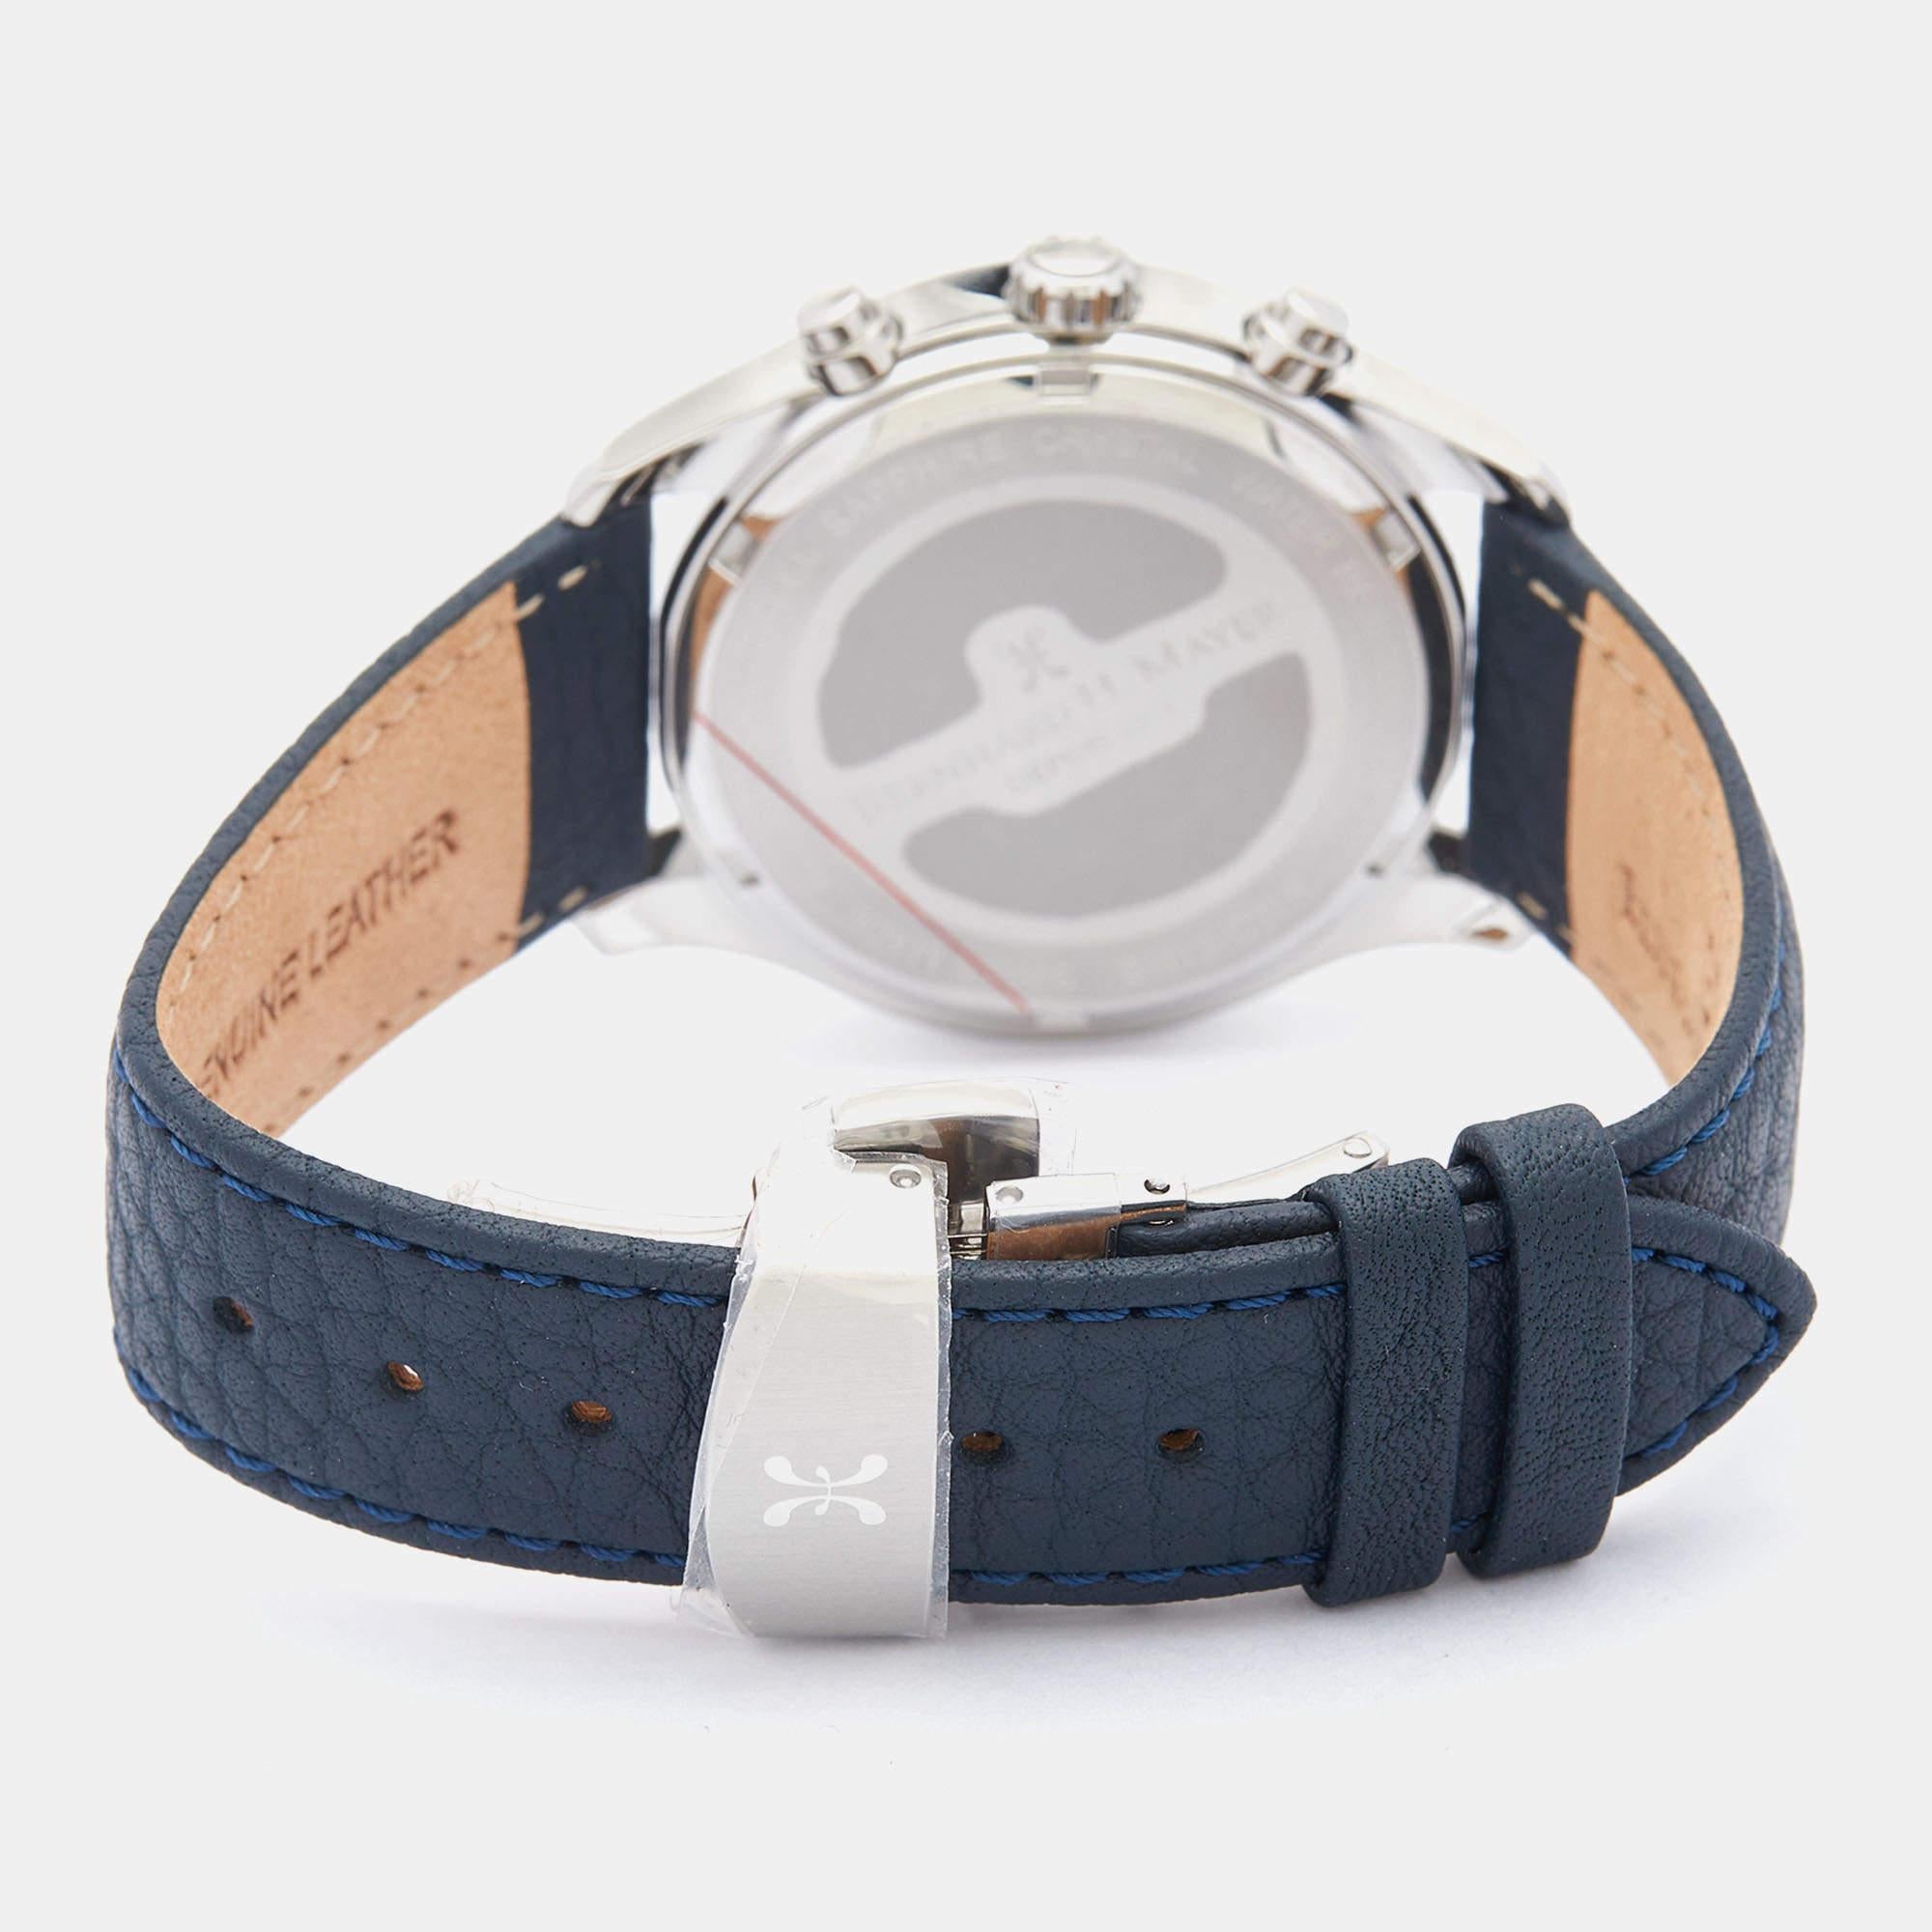 The Bernard H. Mayer Iris is a stylish and versatile unisex wristwatch. It features a stainless steel case with a leather strap, offering a sophisticated look. The watch showcases a blue hue on the dial, adding a unique touch. With its reliable